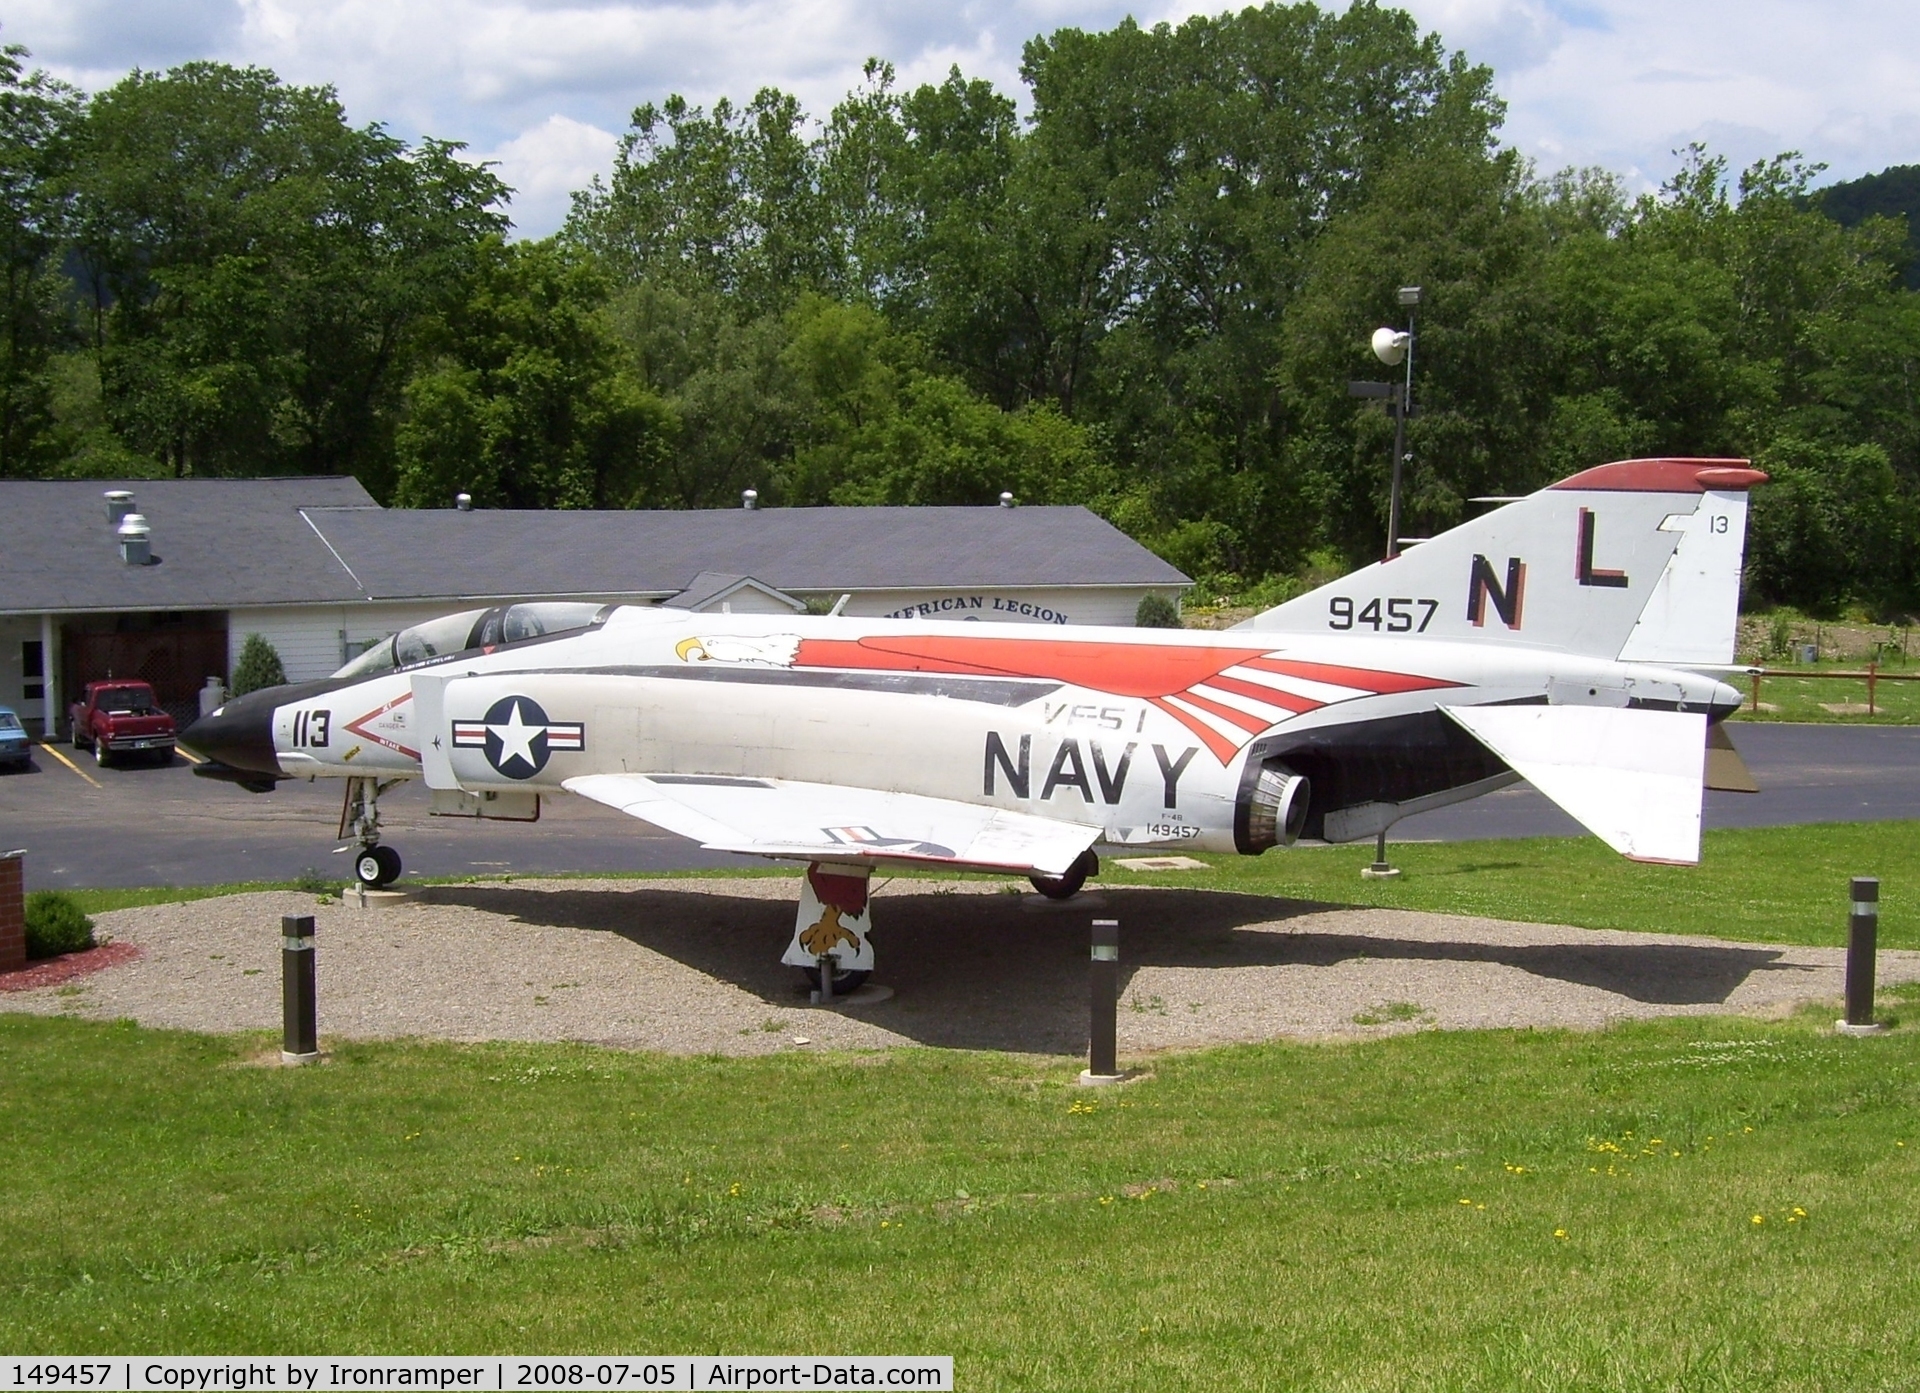 149457, McDonnell F-4B Phantom II C/N 174, American Legion Post 1434, Hindsdale NY, On June 11th 1972, Lt's Winston Copeland and Don Bouchoux of VF-51 (USS Coral Sea CVA-43) were credited with downing 1 NVAF Mig-17